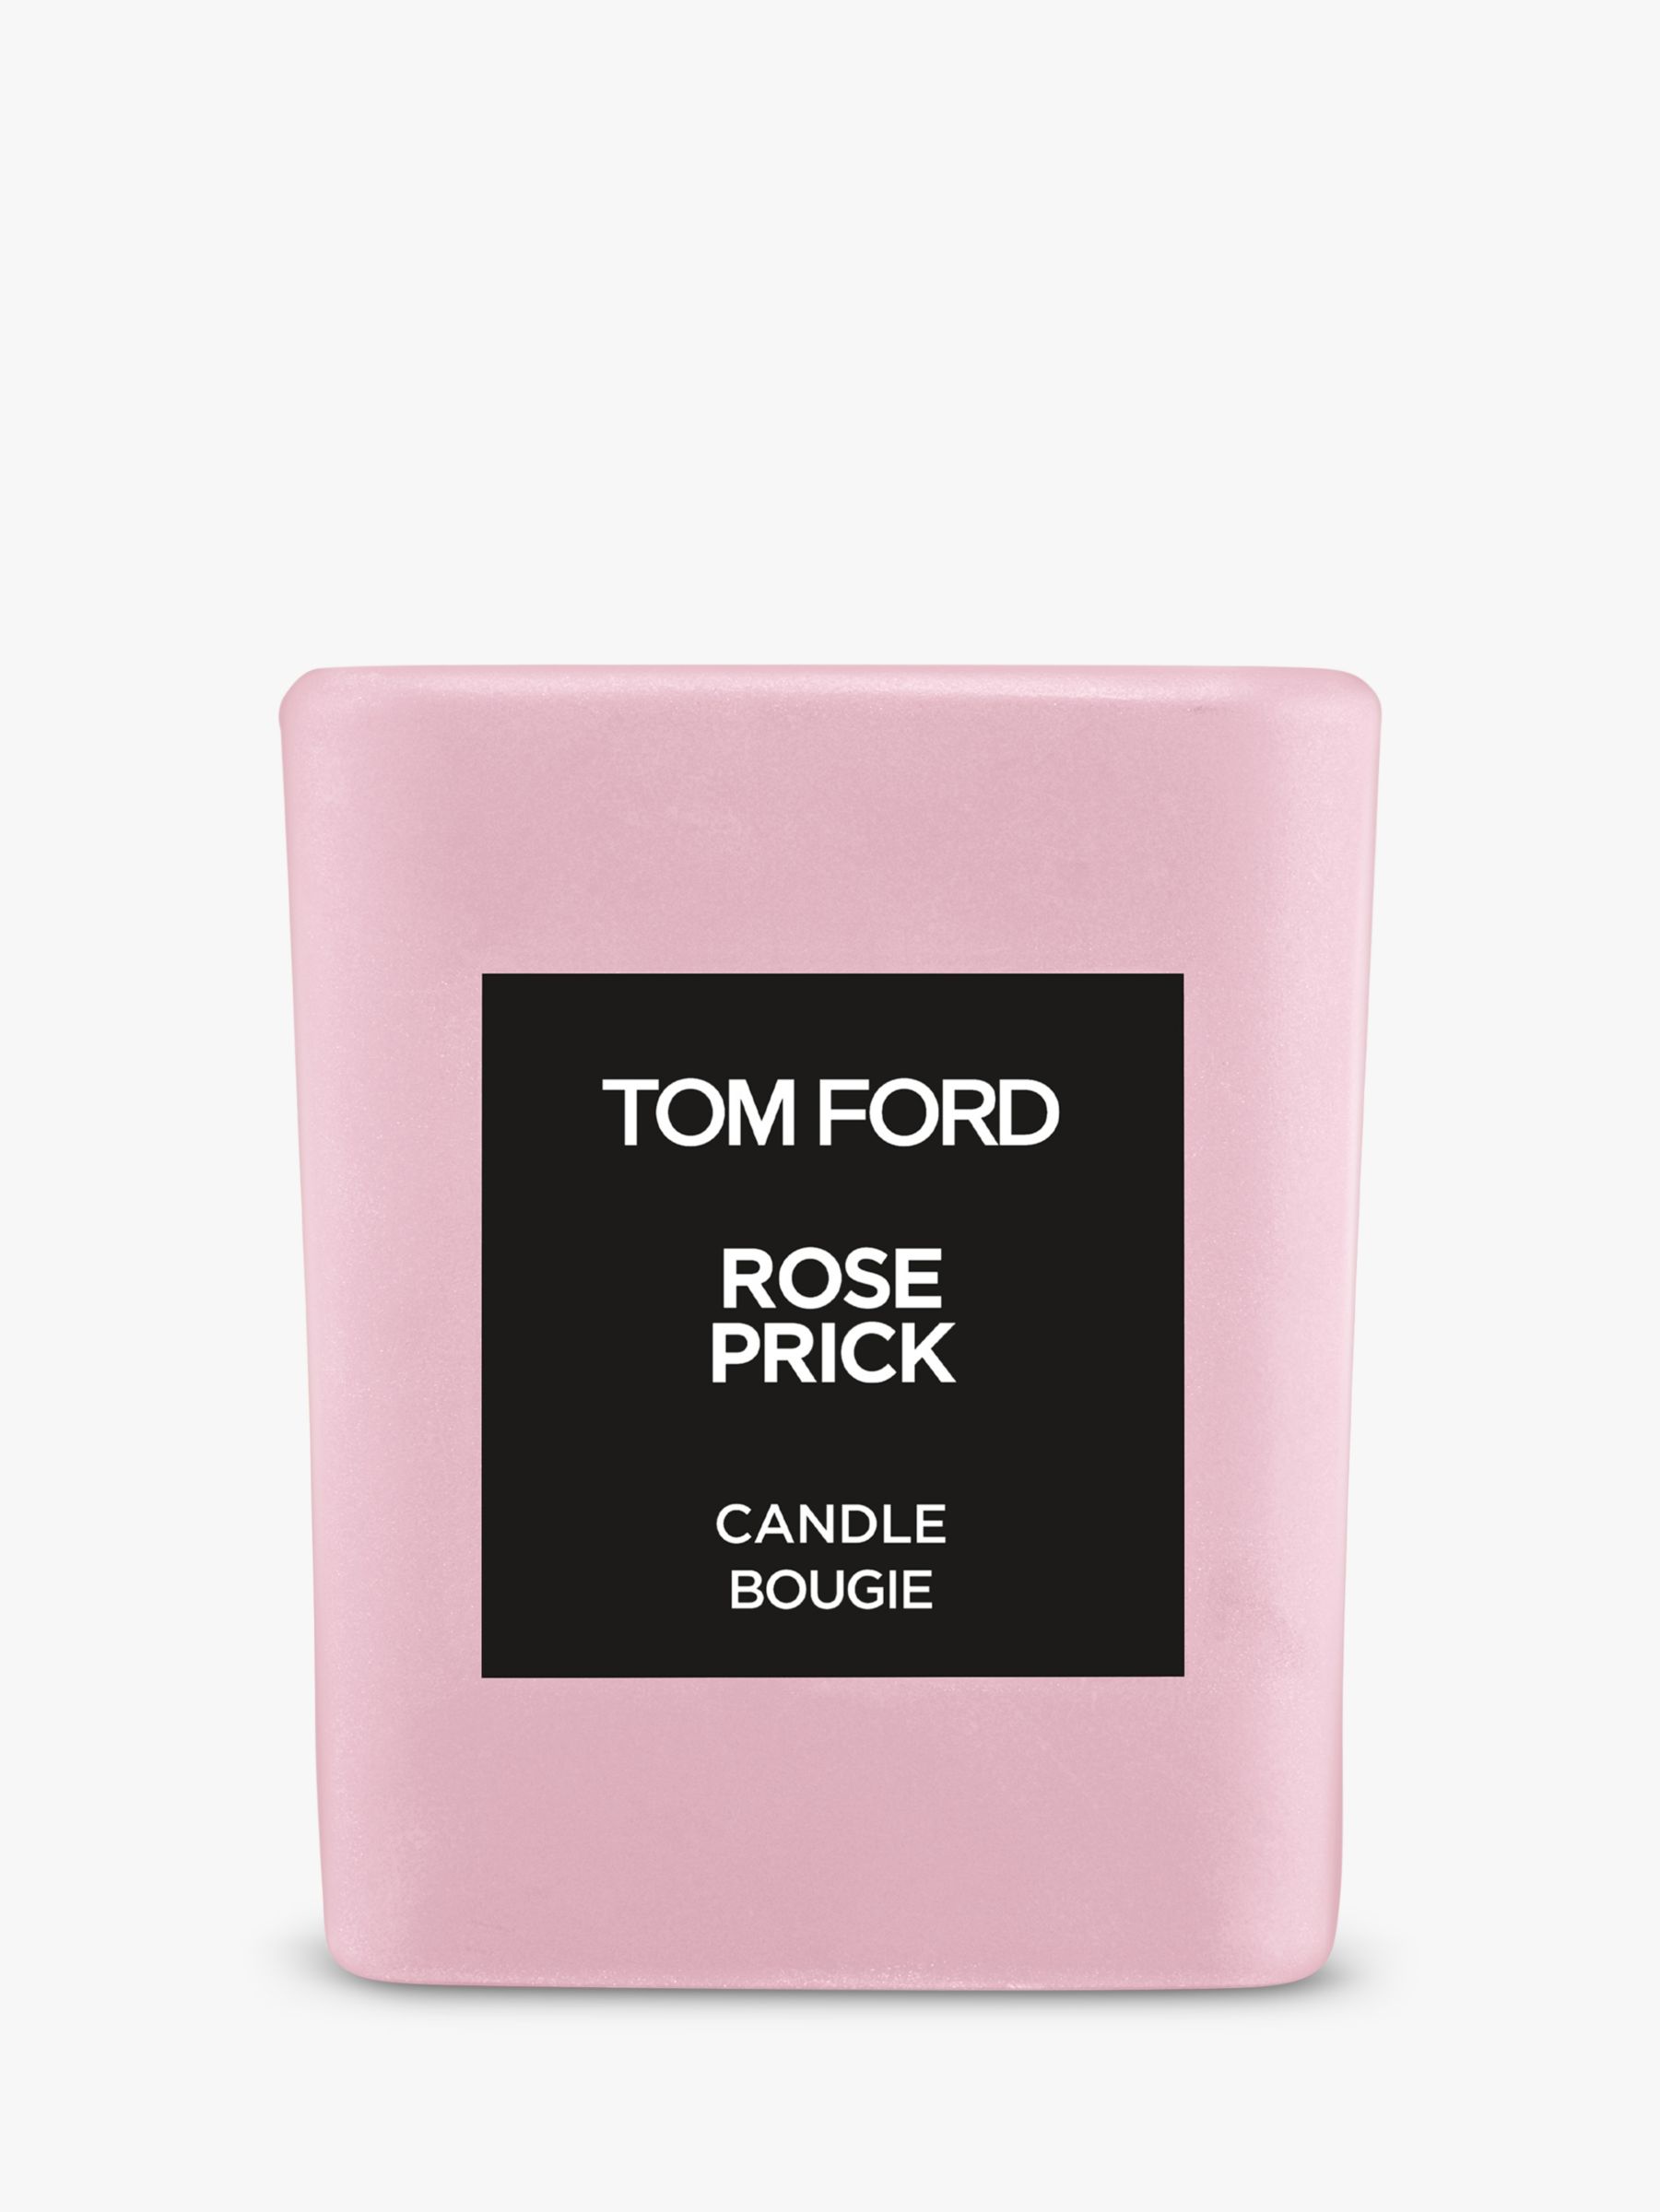 TOM FORD Candles & Home Fragrance | John Lewis & Partners